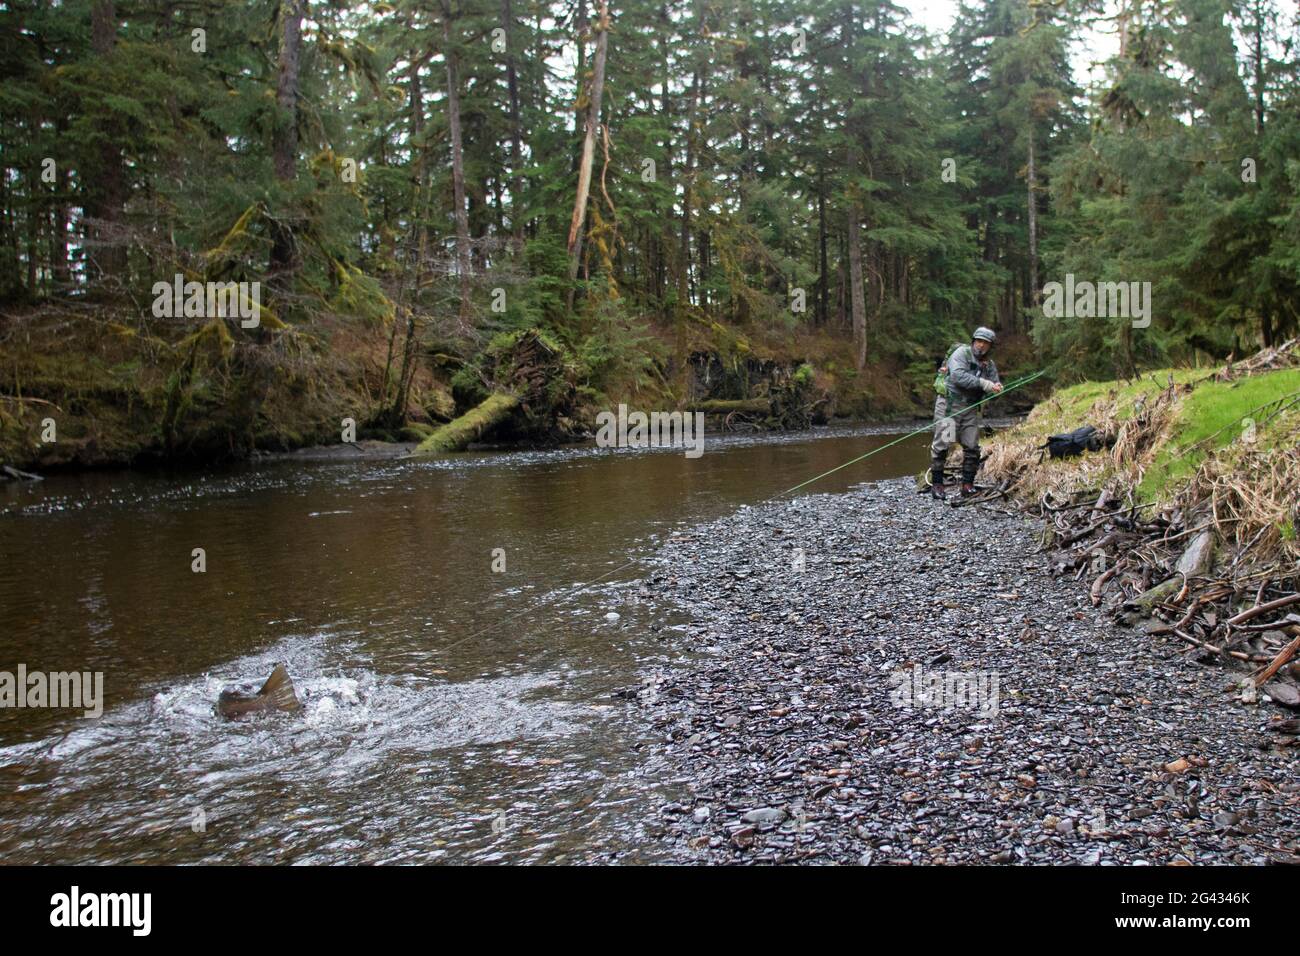 A fly fisherman beaches a large steelhead in one of Alaska's Tongass National Forest streams. Stock Photo